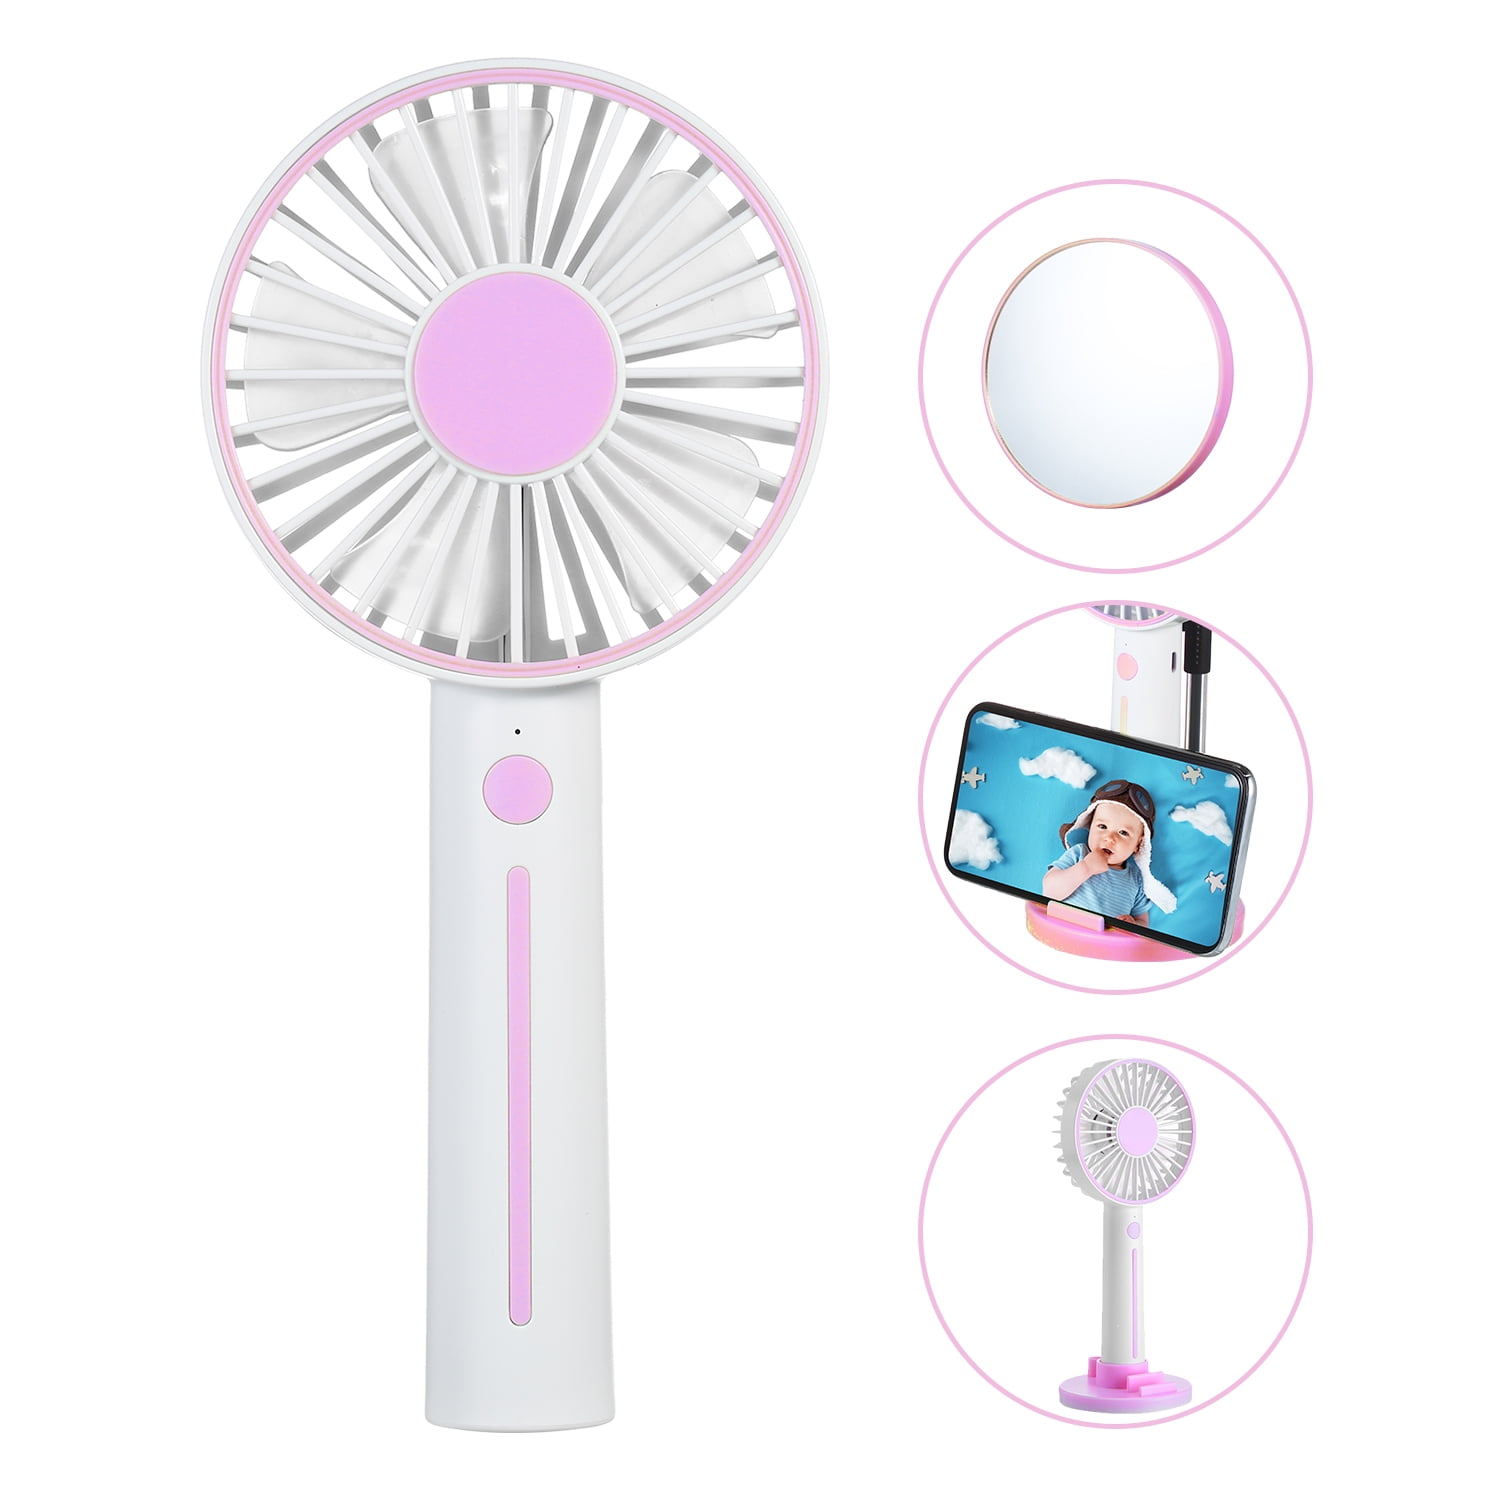 Details about   Handheld Fan Small Personal Portable USB Battery Operated Mini Fans W/